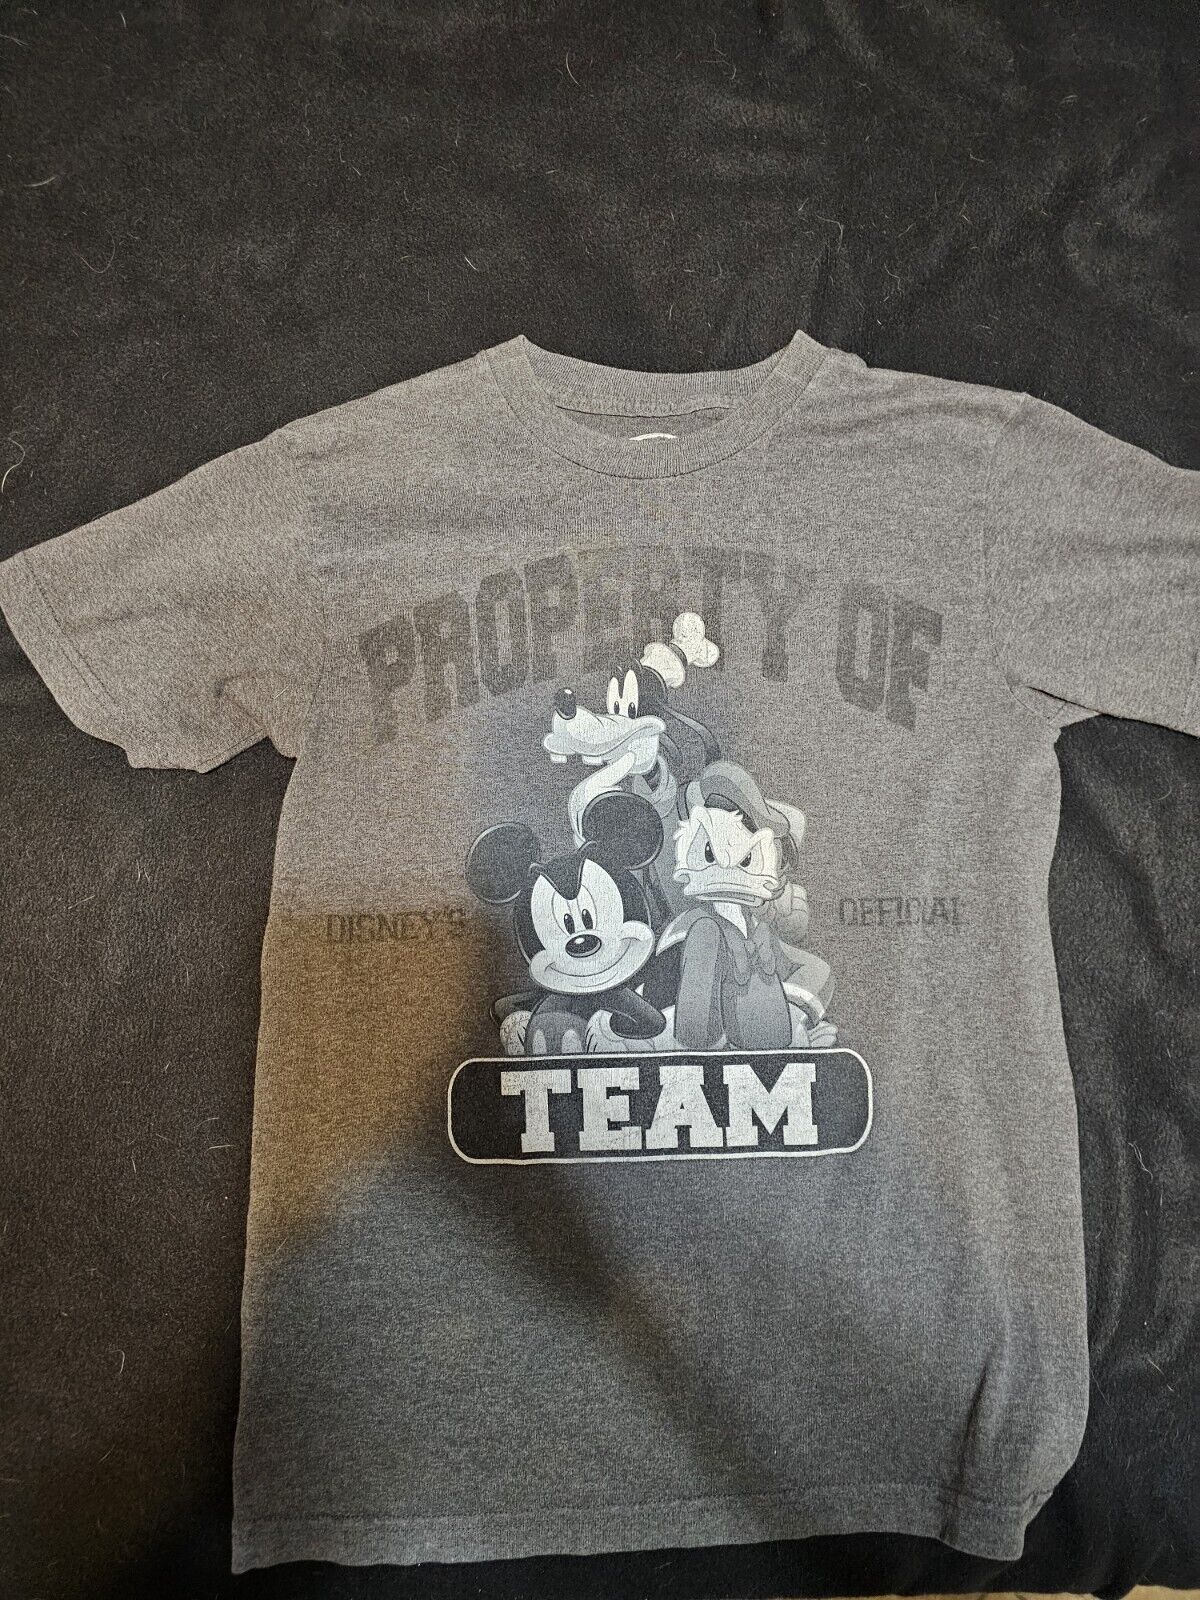 Property of Disney\'s Official Team - T Shirt - S - Grey - Mickey, Goofy, Donald